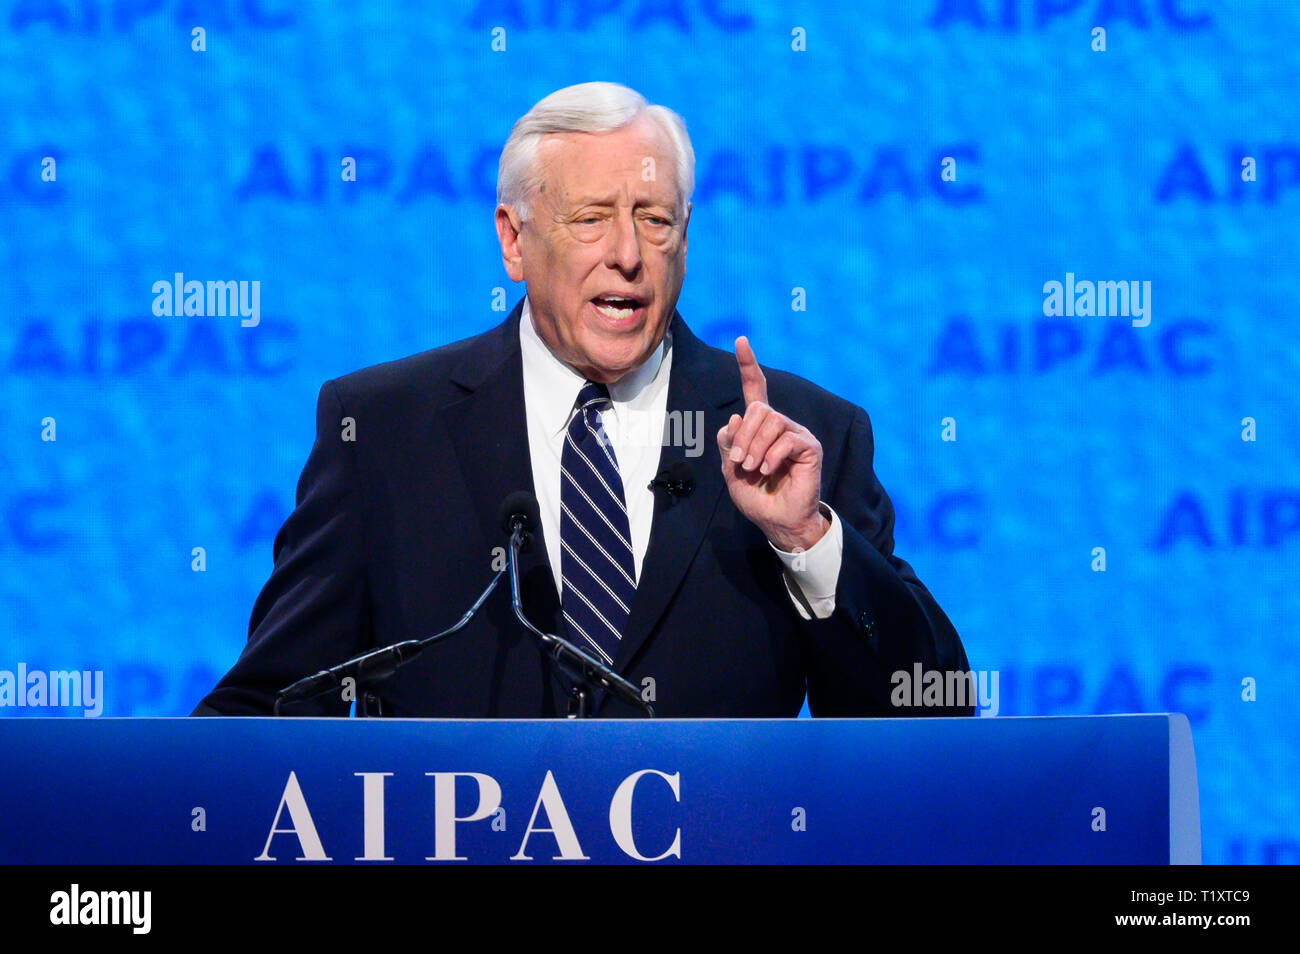 U.S. Representative Steny Hoyer (D-MD), House Majority Leader seen speaking during the American Israel Public Affairs Committee (AIPAC) Policy Conference in Washington, DC. Stock Photo